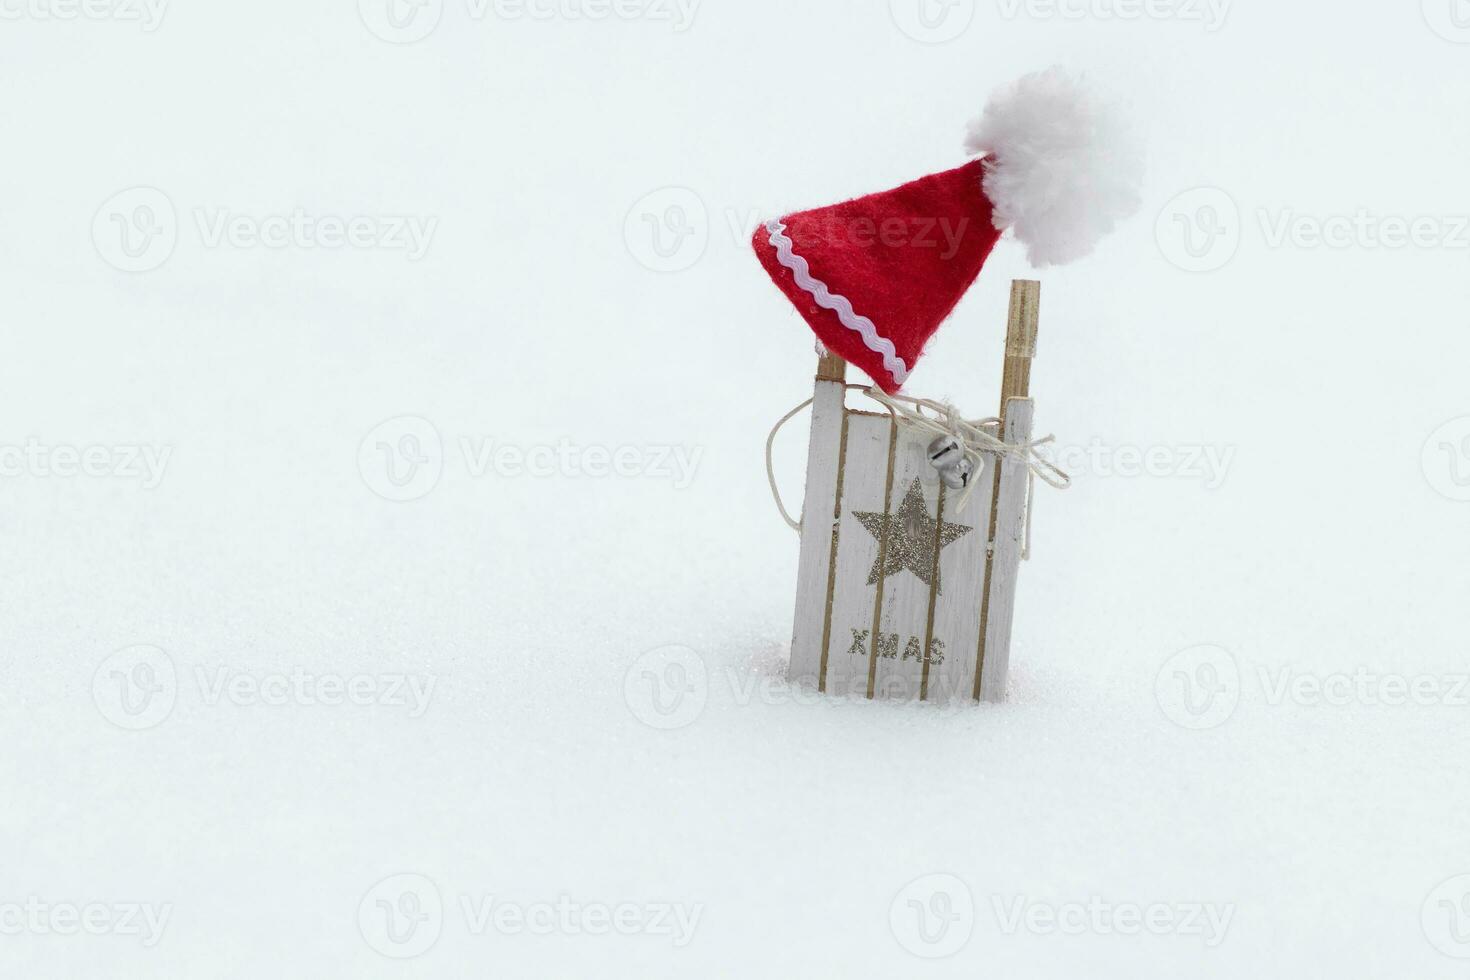 Santa Claus hat on a wooden made sleigh. photo